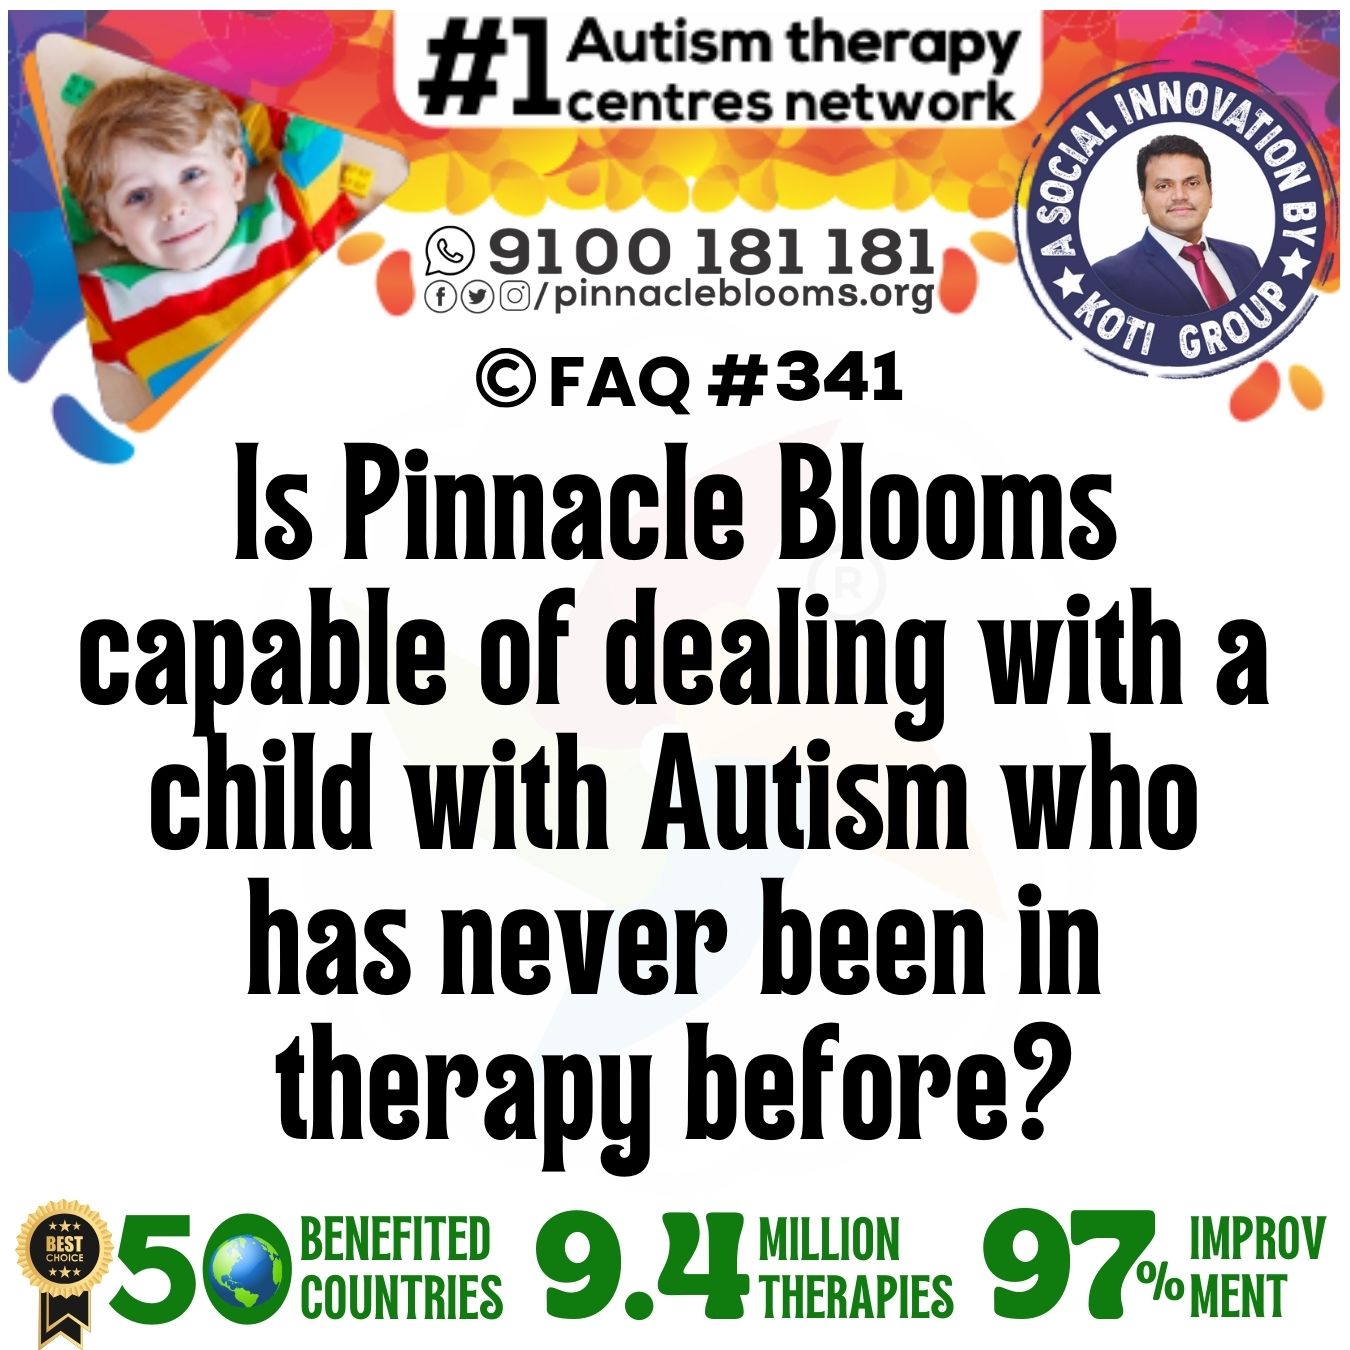 Is Pinnacle Blooms capable of dealing with a child with Autism who has never been in therapy before?